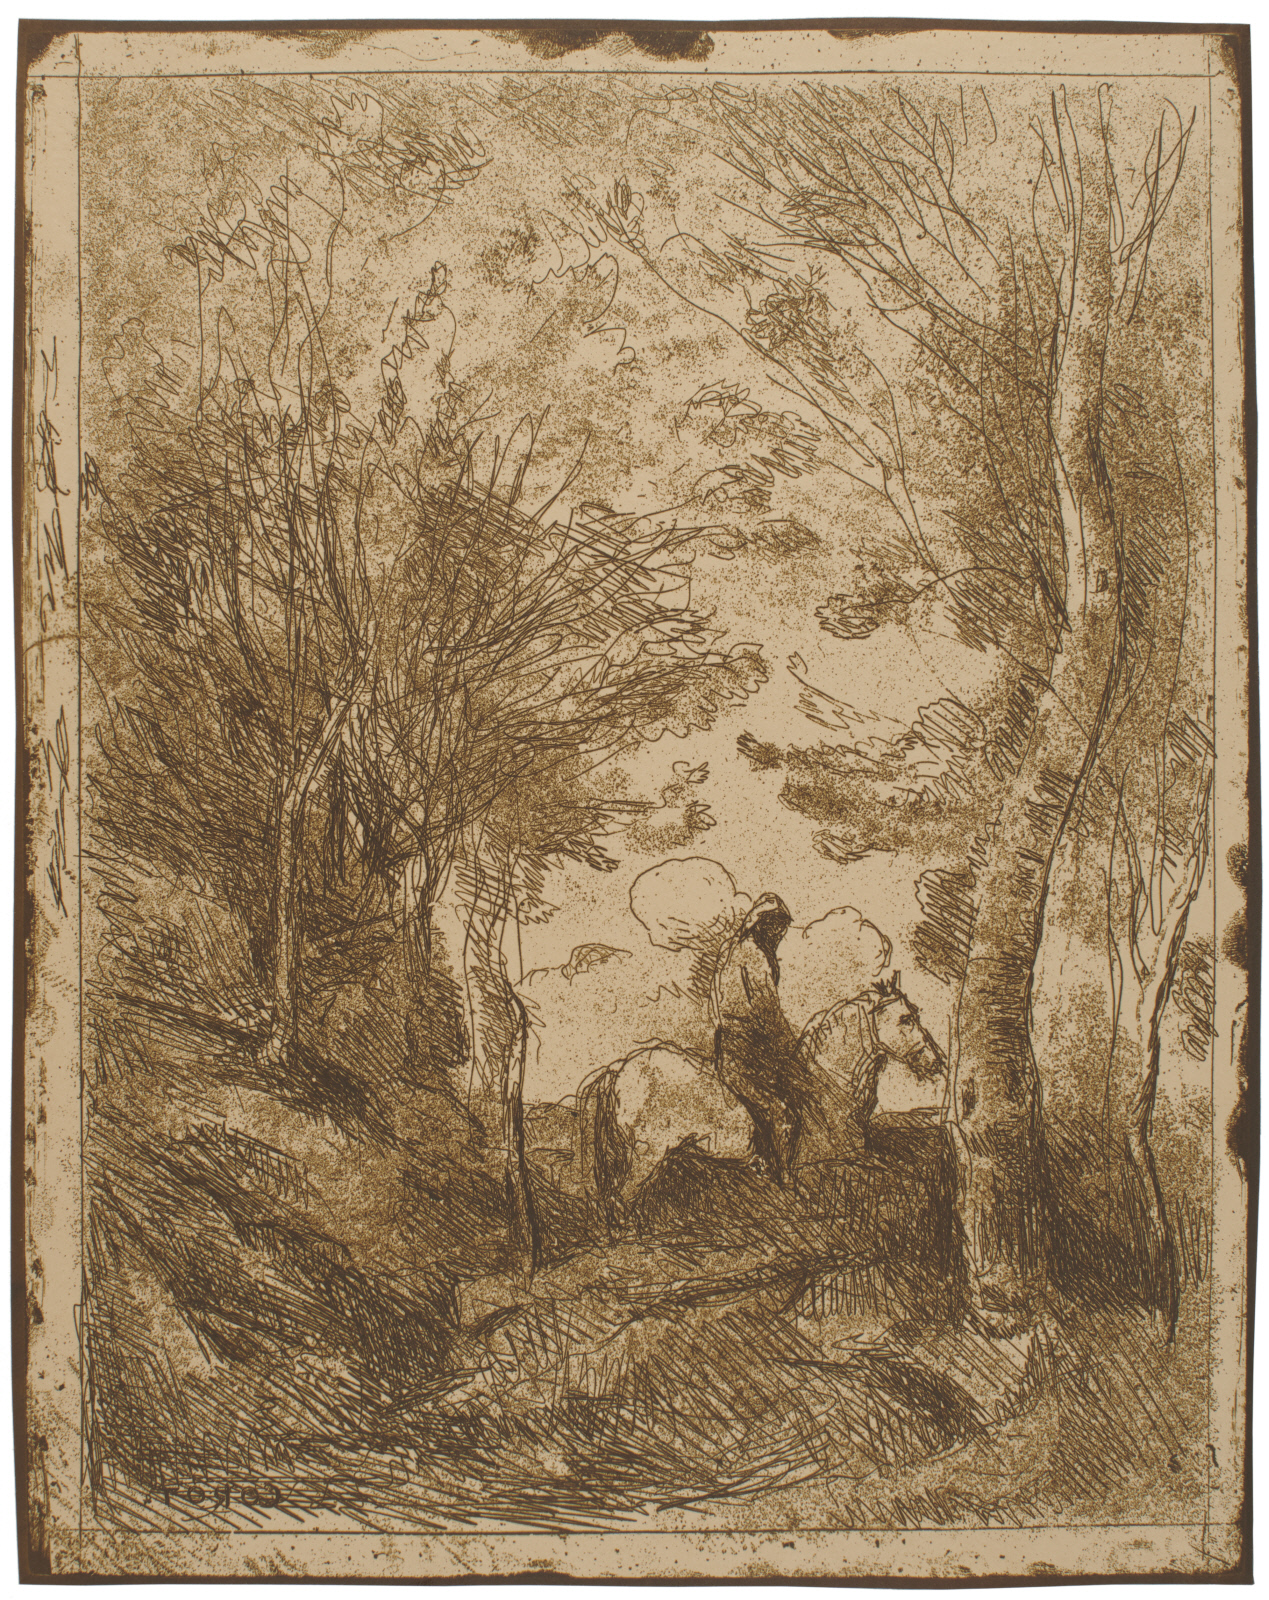 HORSEMAN IN THE WOODS, LARGE PLATE (LE GRAND CAVALIER SOUS BOIS)